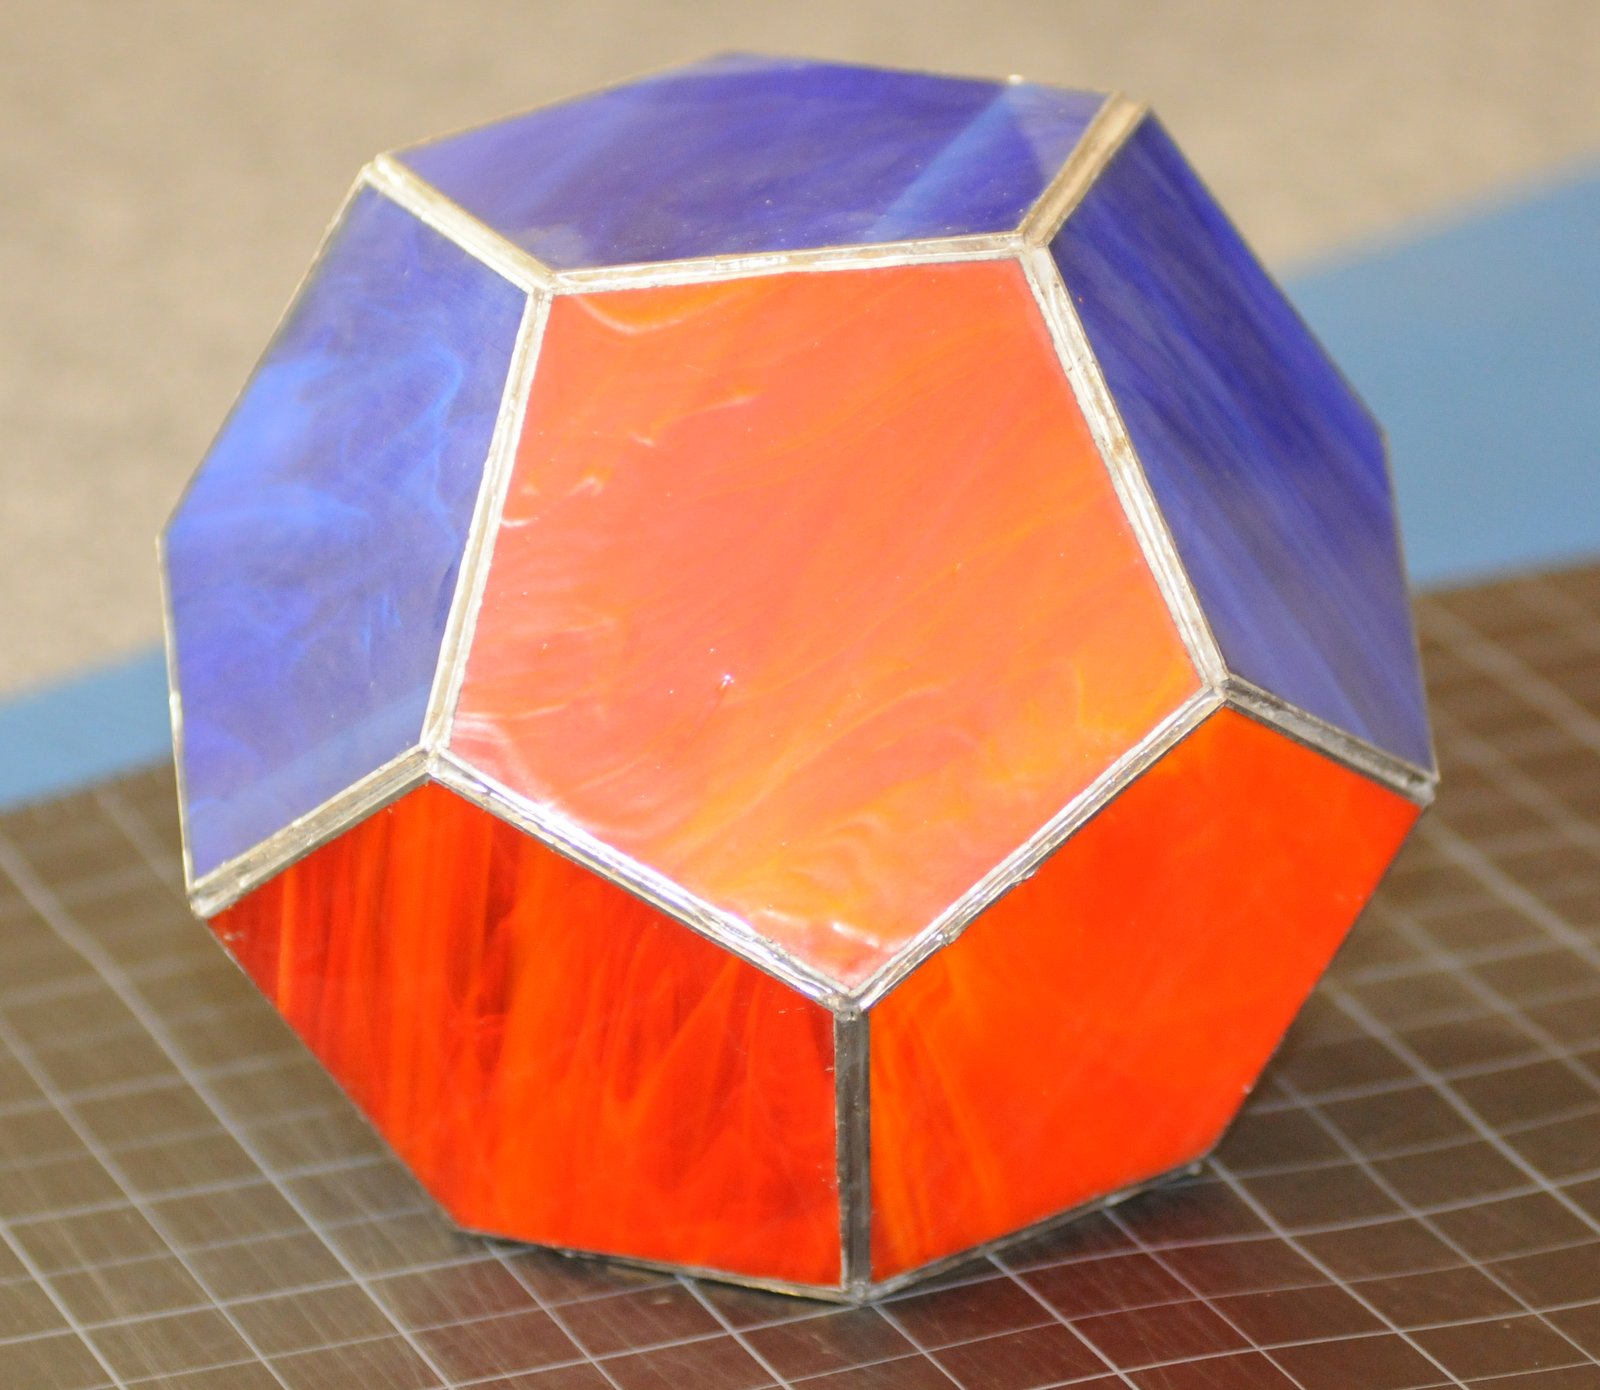 the Platonic Solid Dodecahedron made of blue and orange pentagons of stained glass